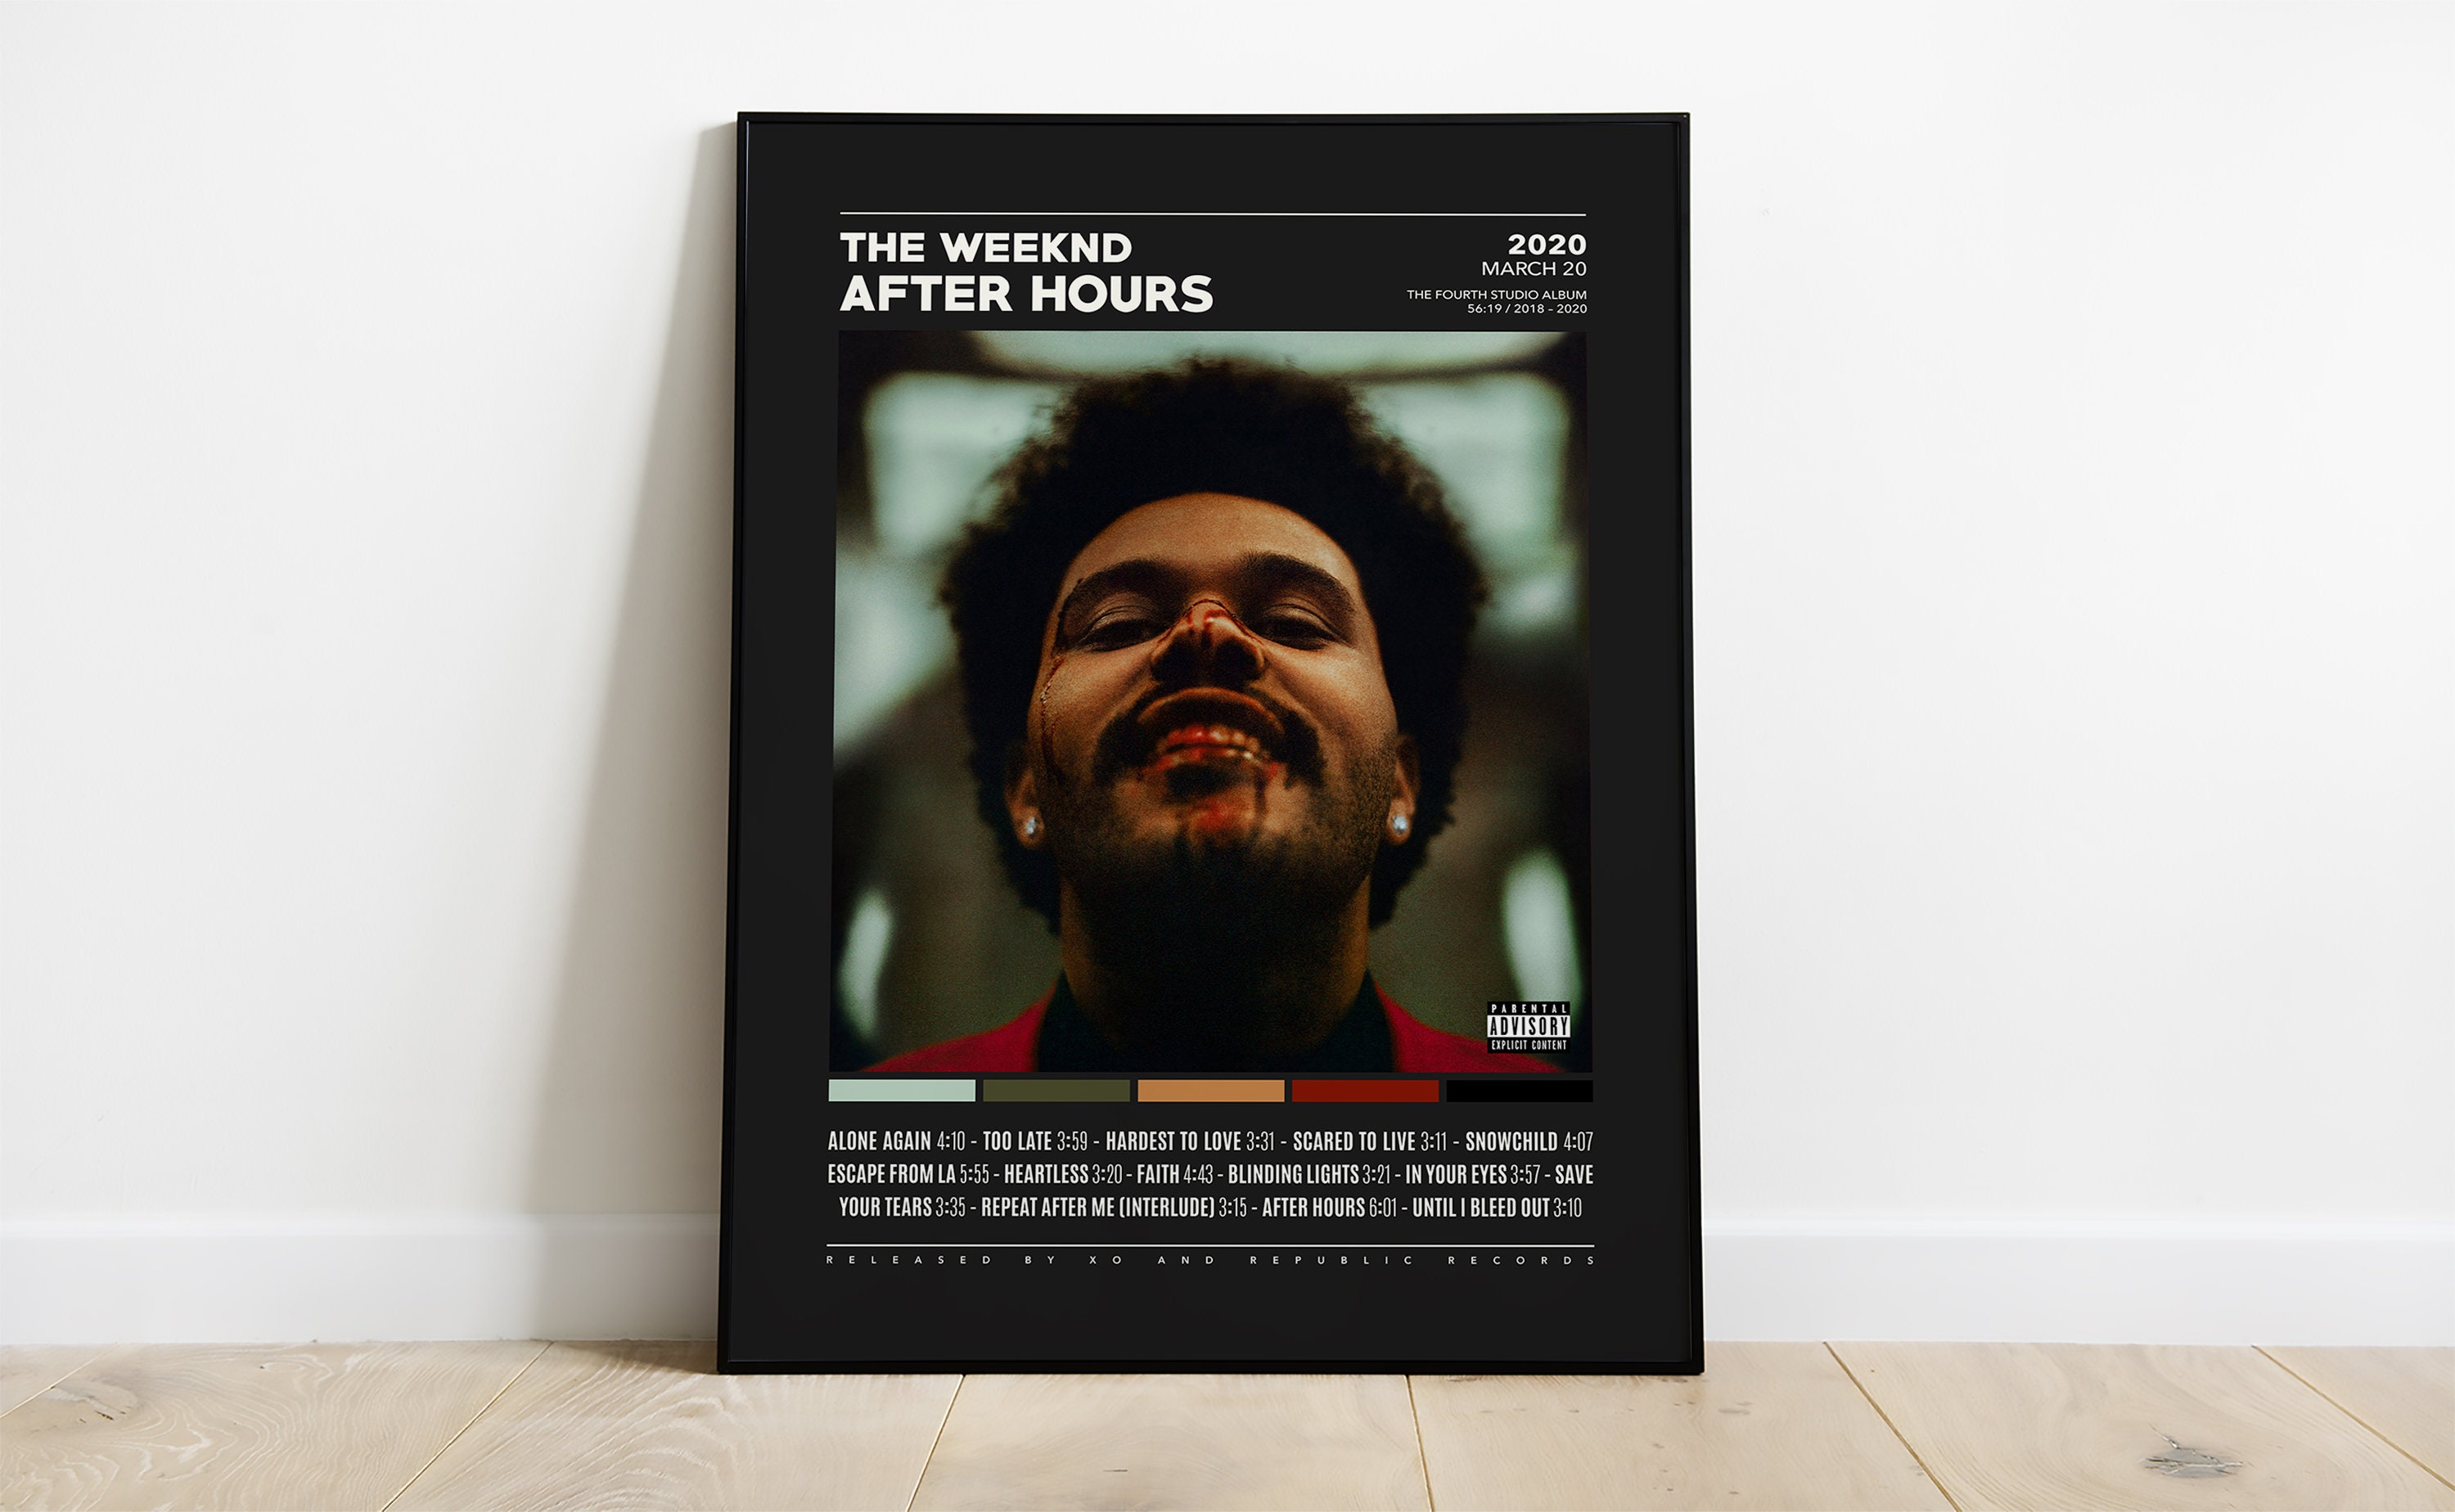 After poster. Weeknd "after hours".